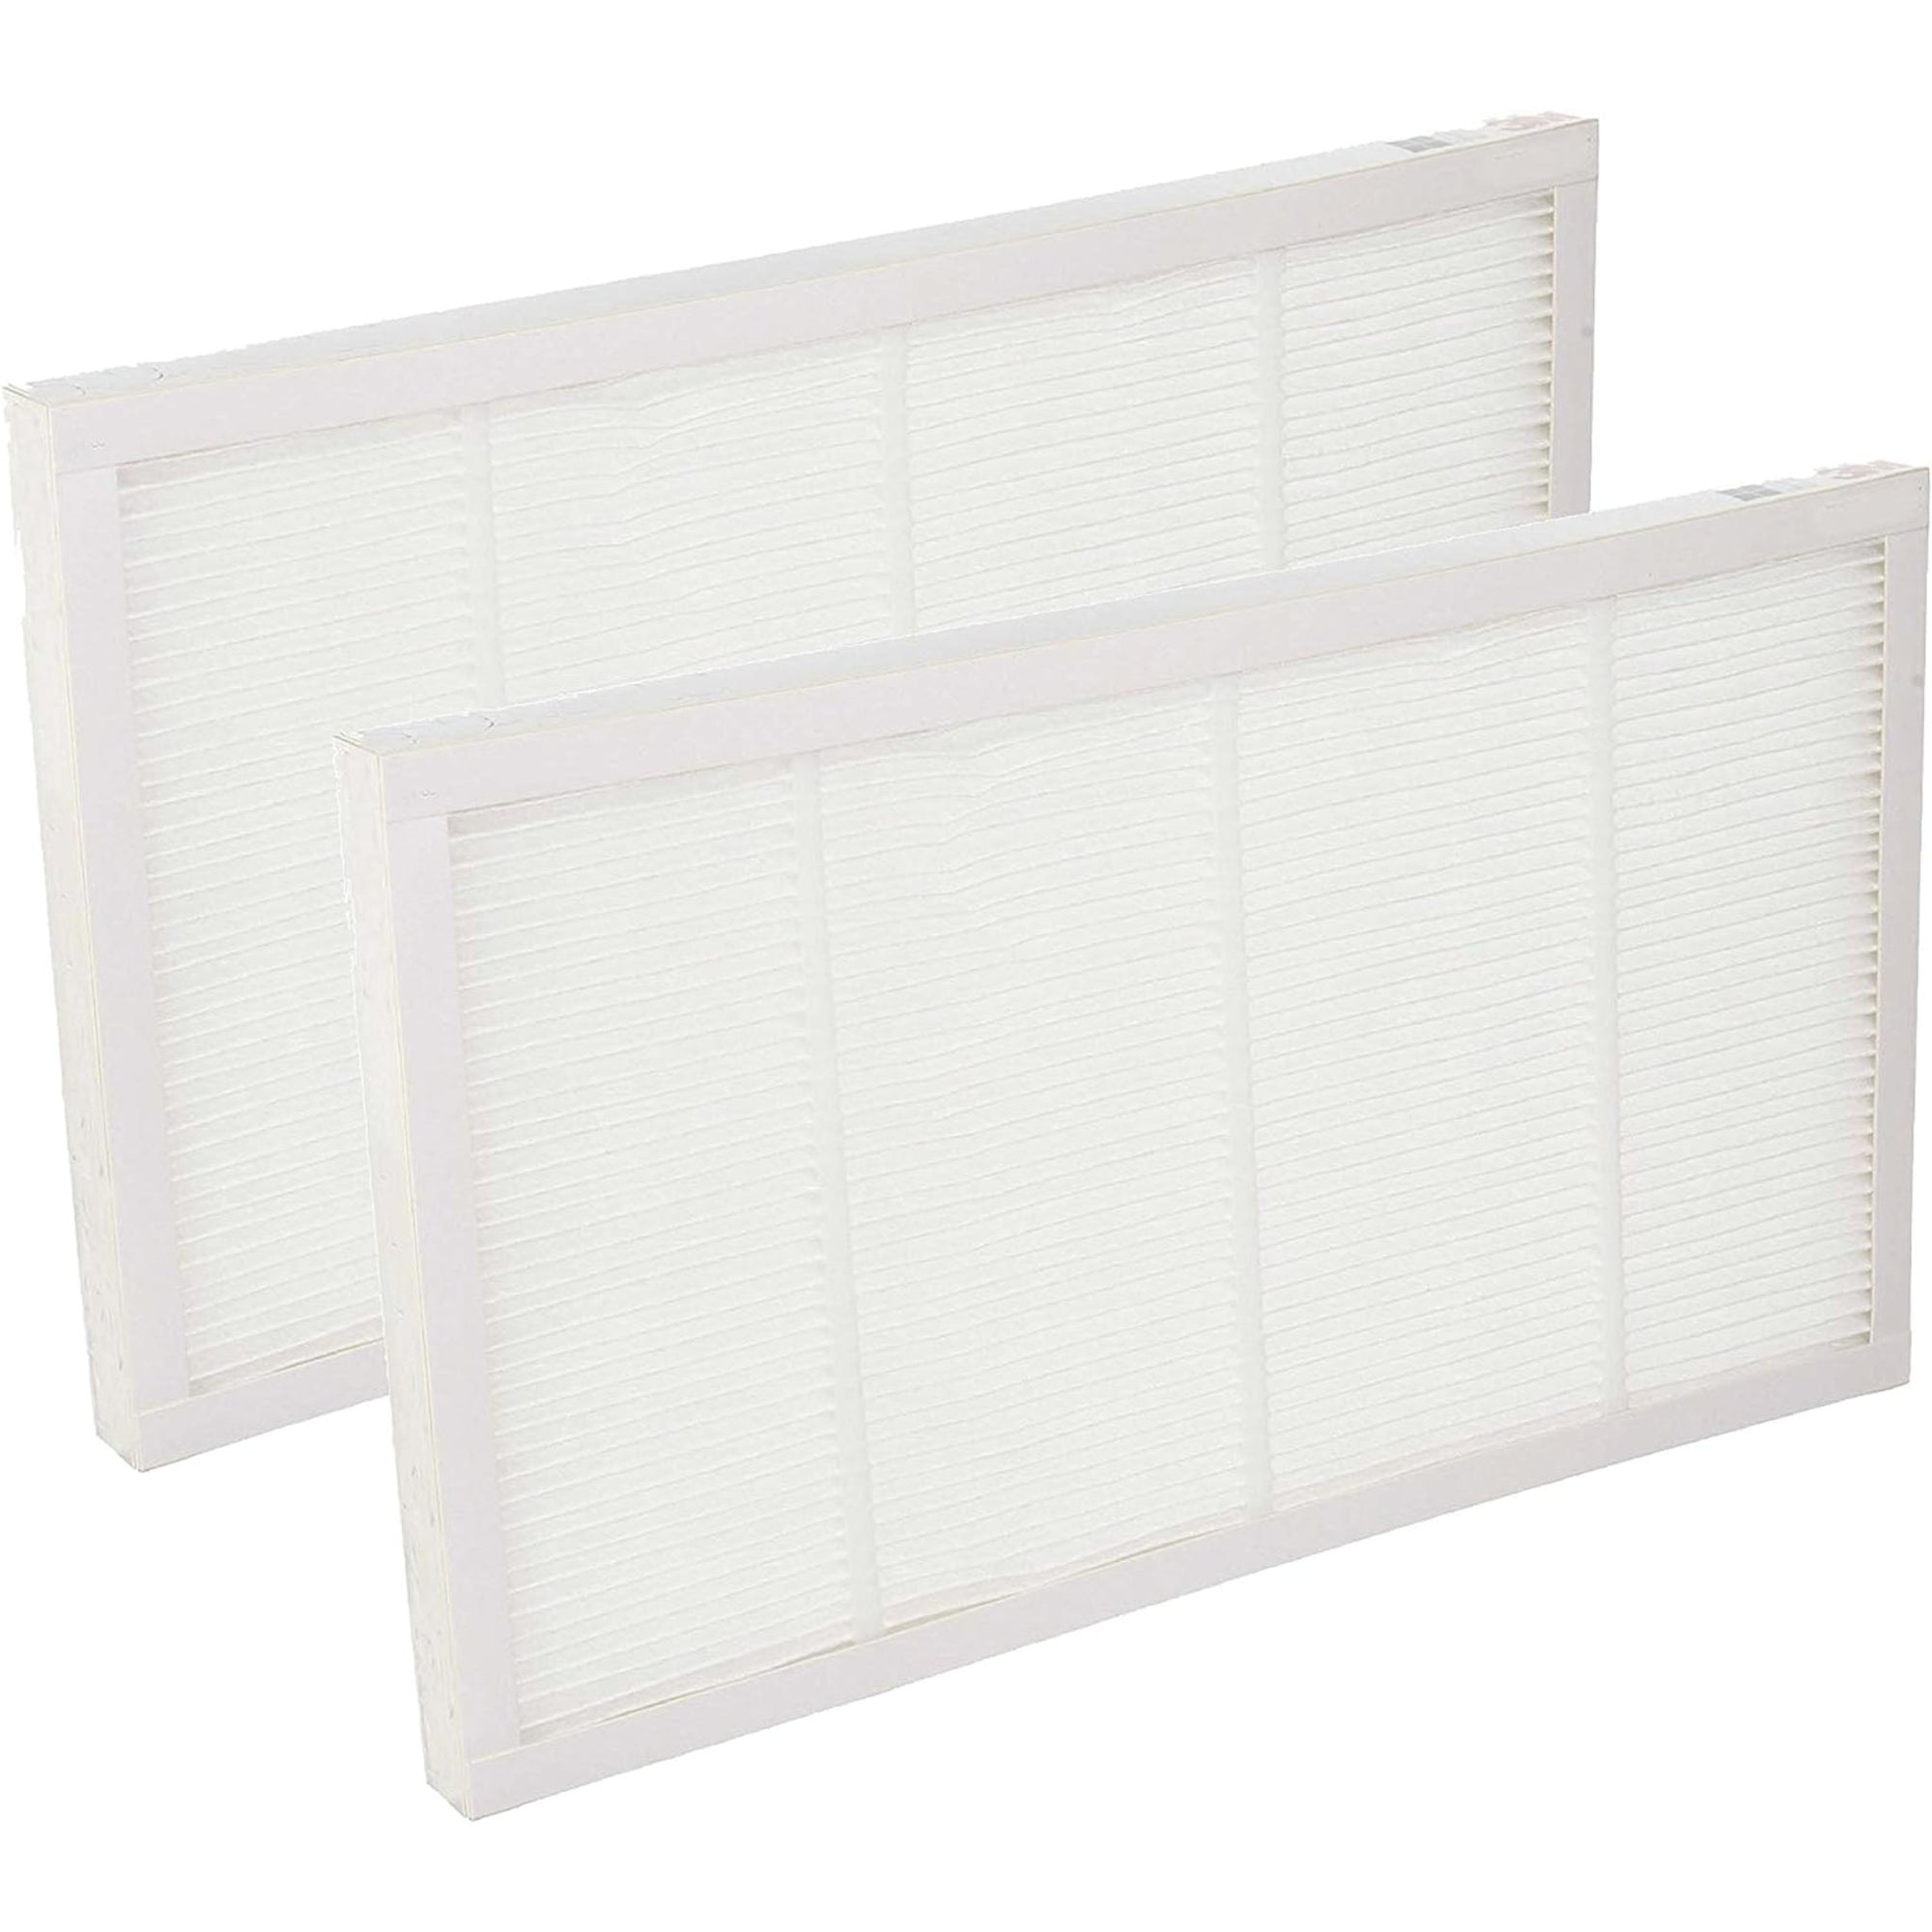 Nispira HEPA Filters Compatible with Filtrete Air Purifier FAP01-RMS FAP02-RMS Part FAPF024 FAPF02